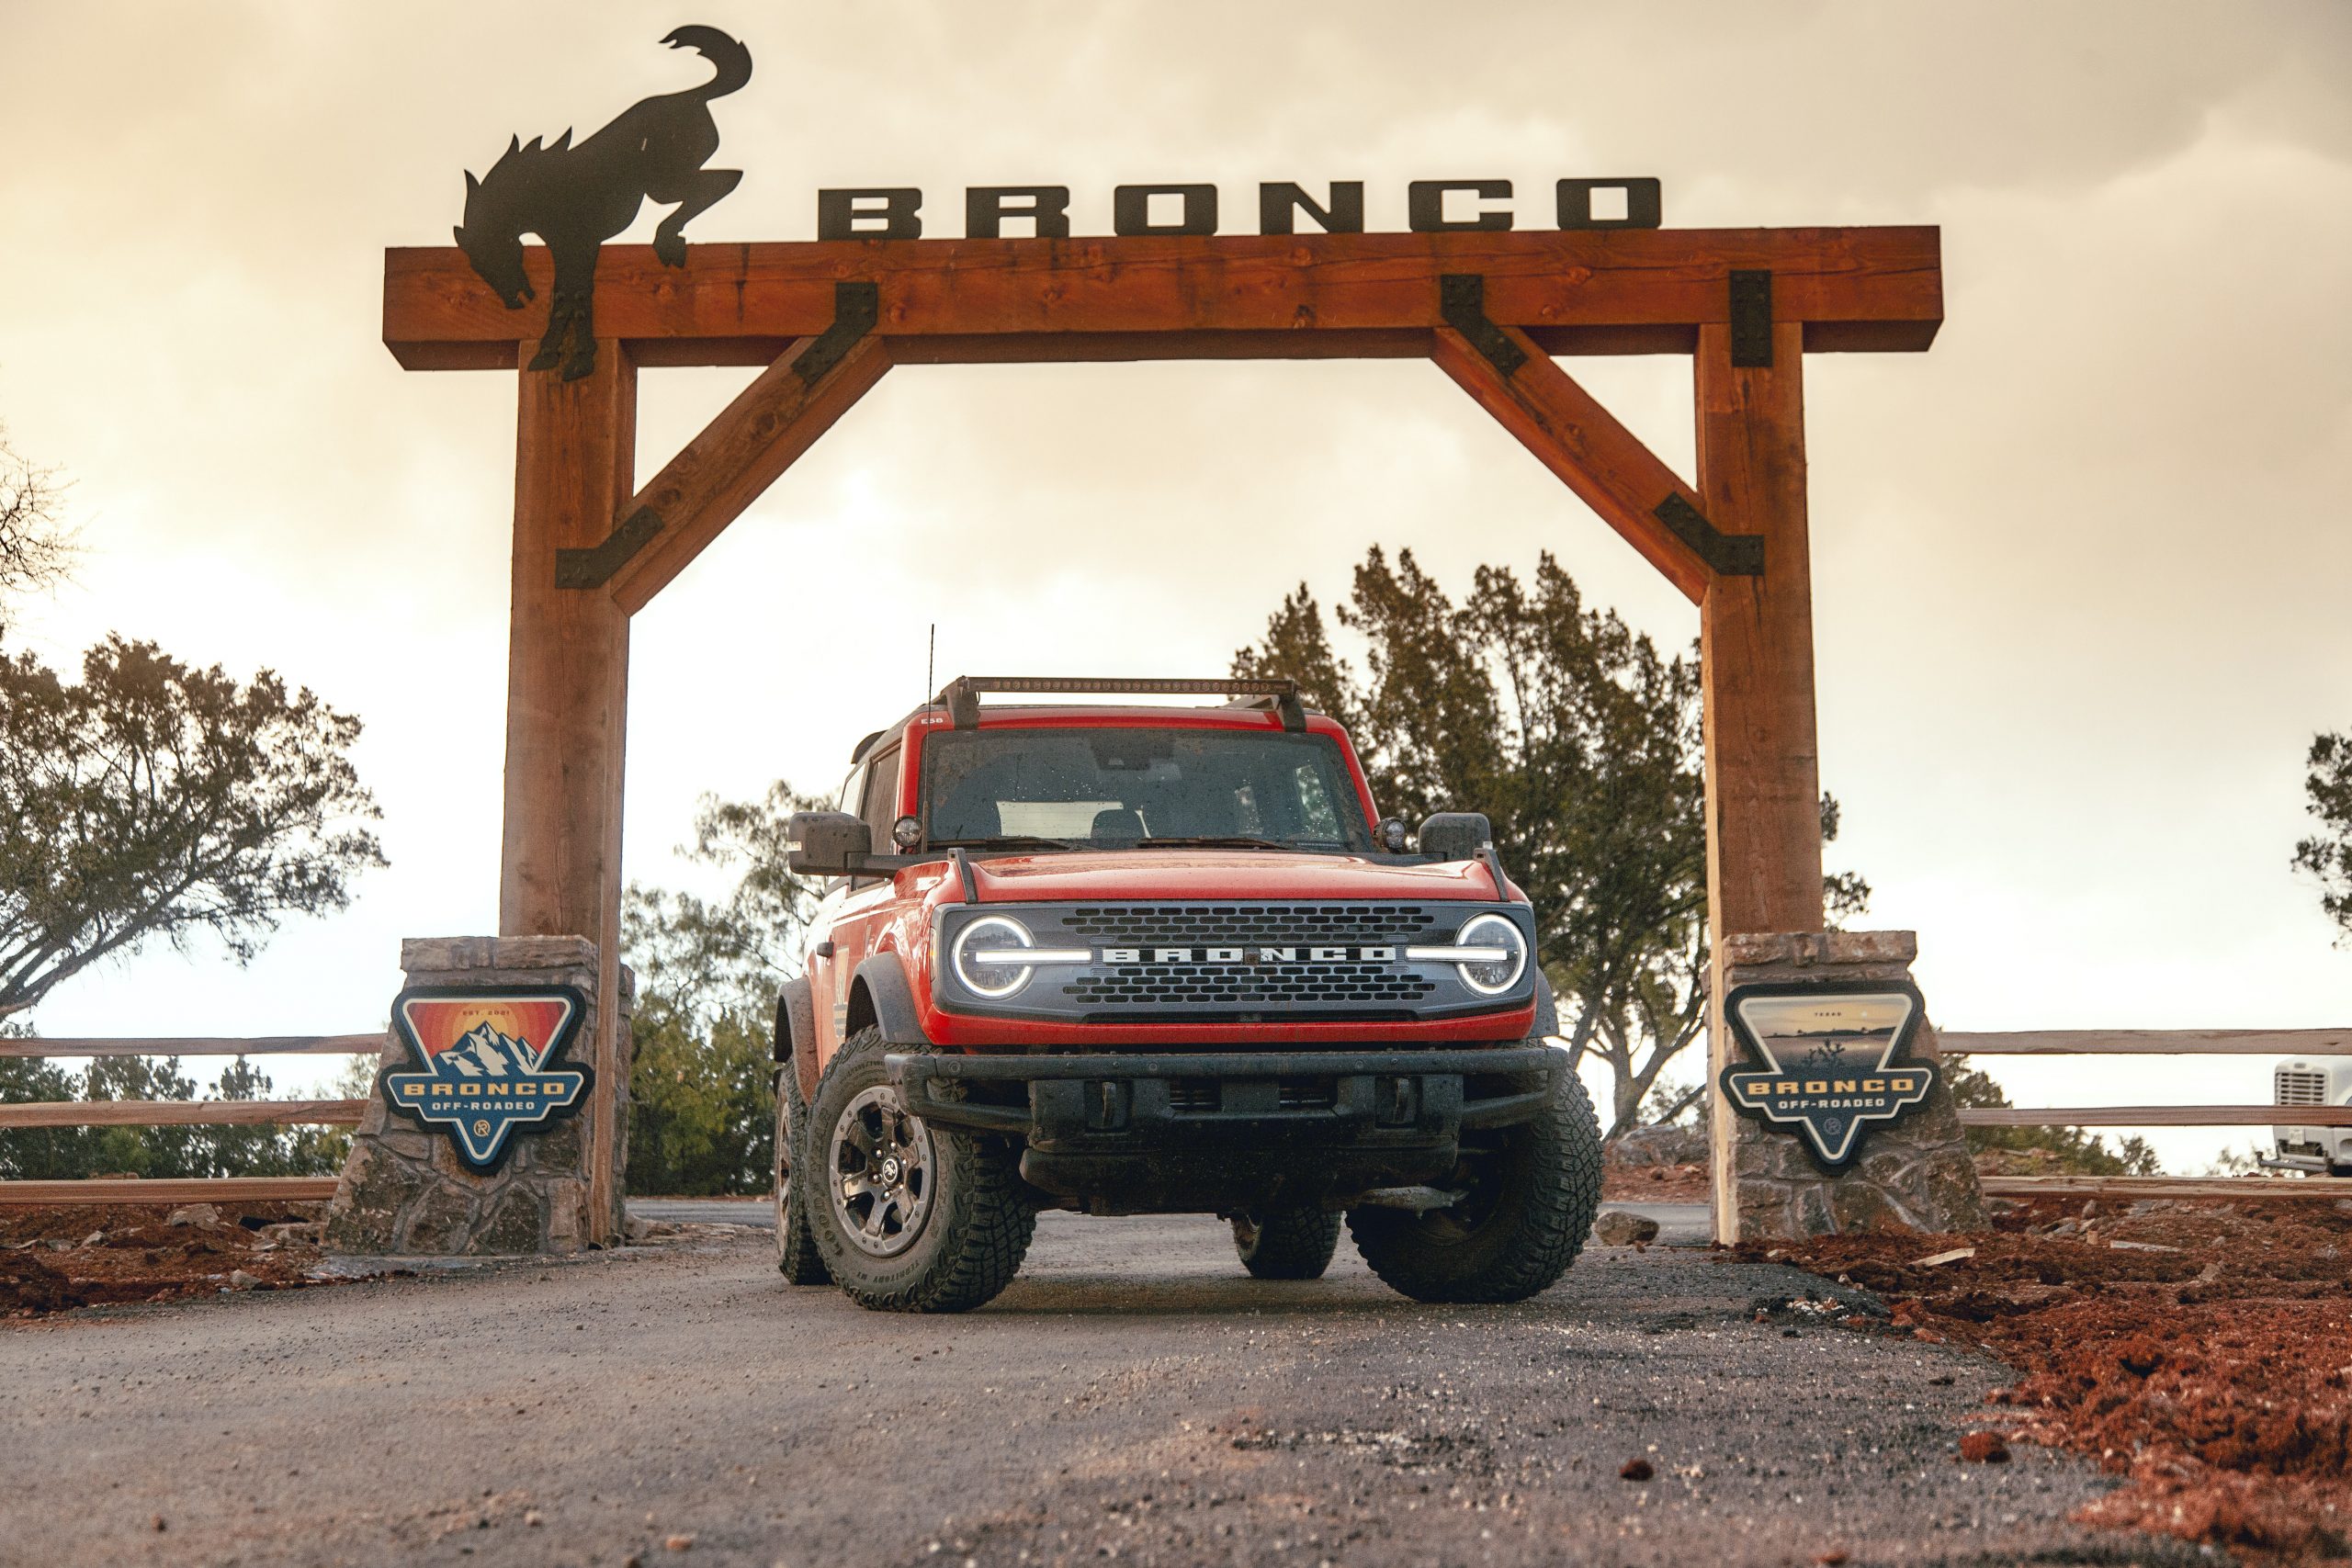 A red 2022 Ford Bronco parked near a large wooden Bronco sign, is the Wildtrak trim worth the price tag?